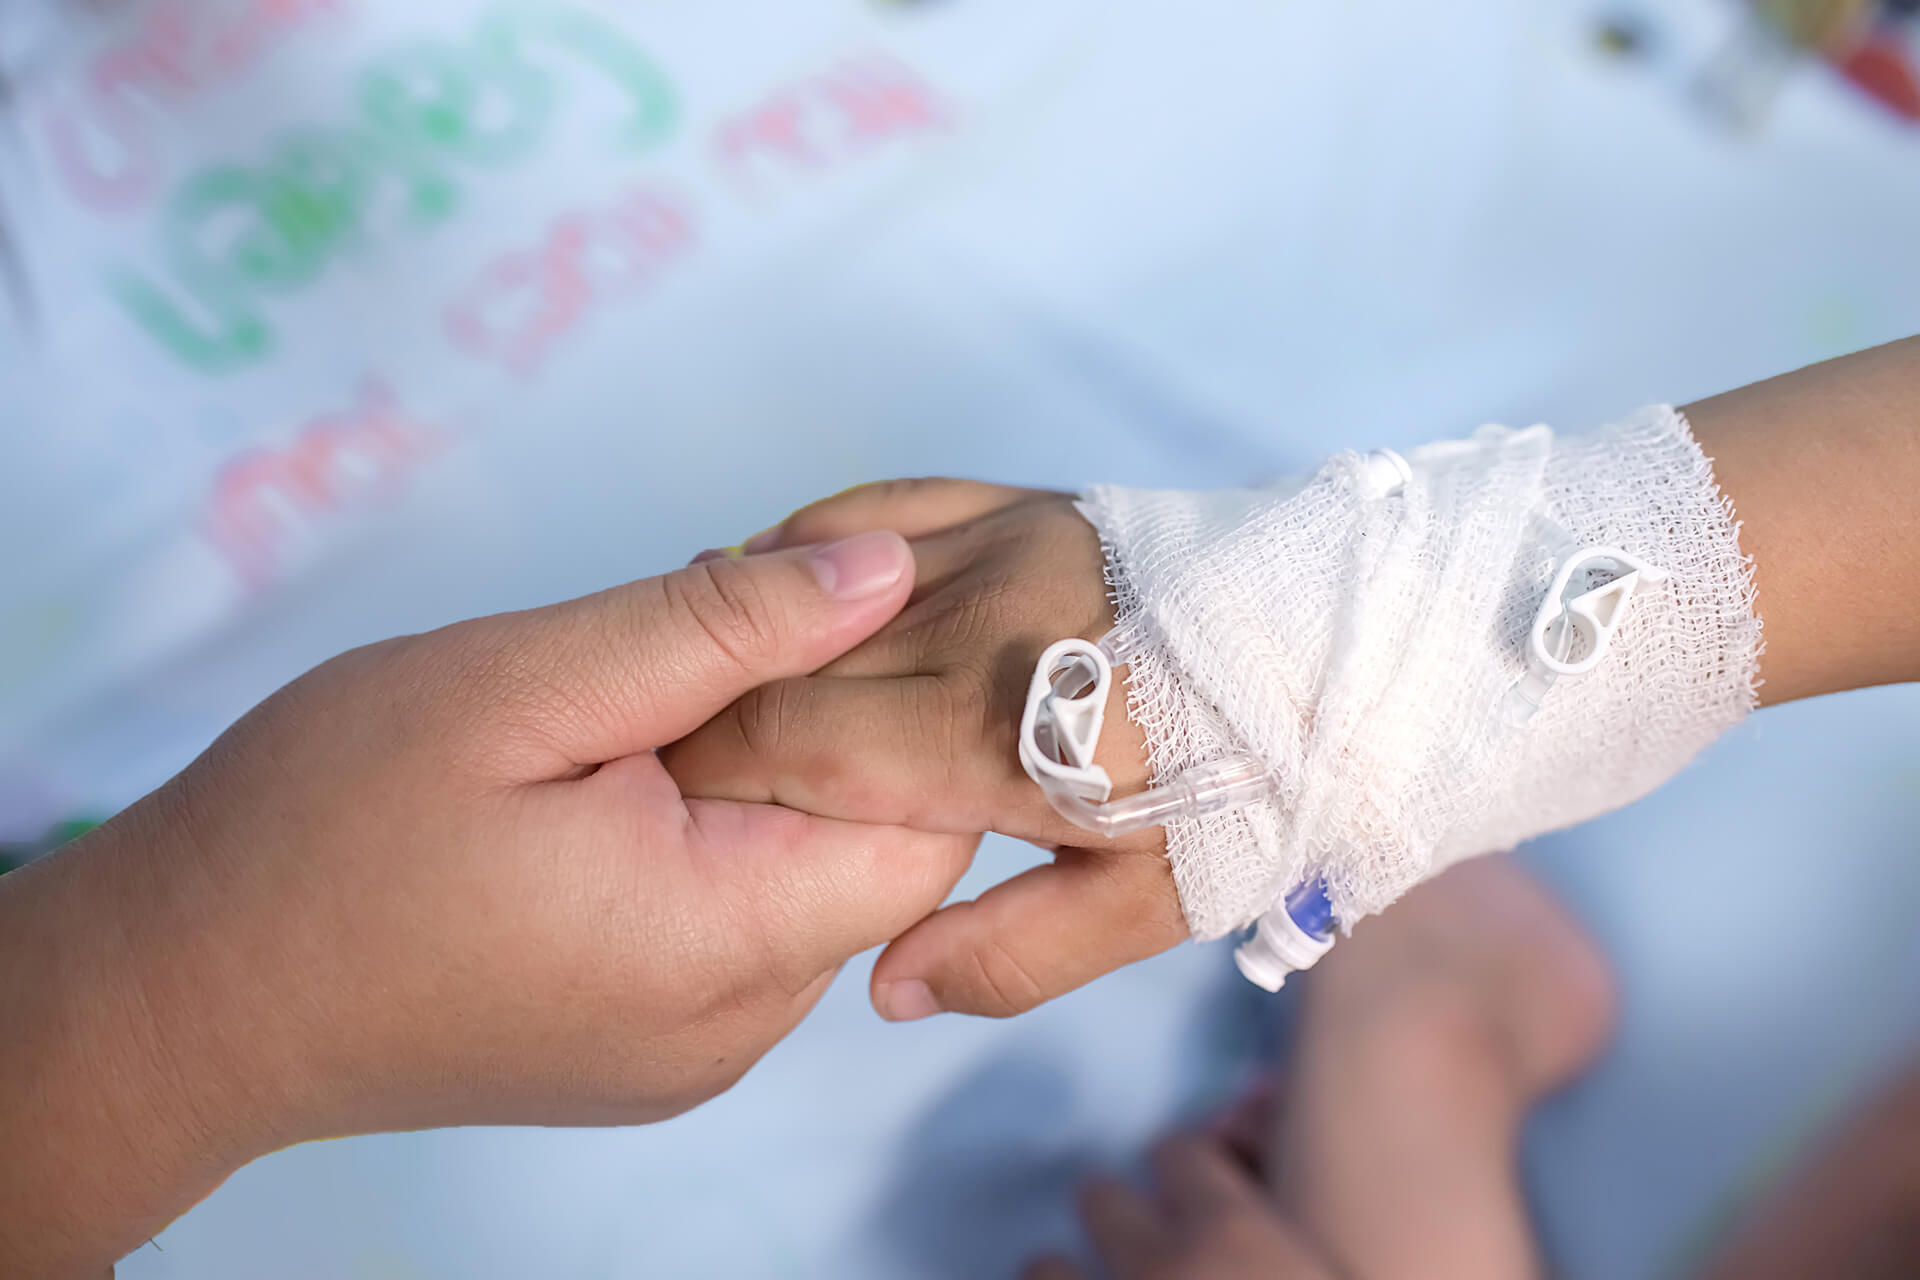 holding child's hand with IV